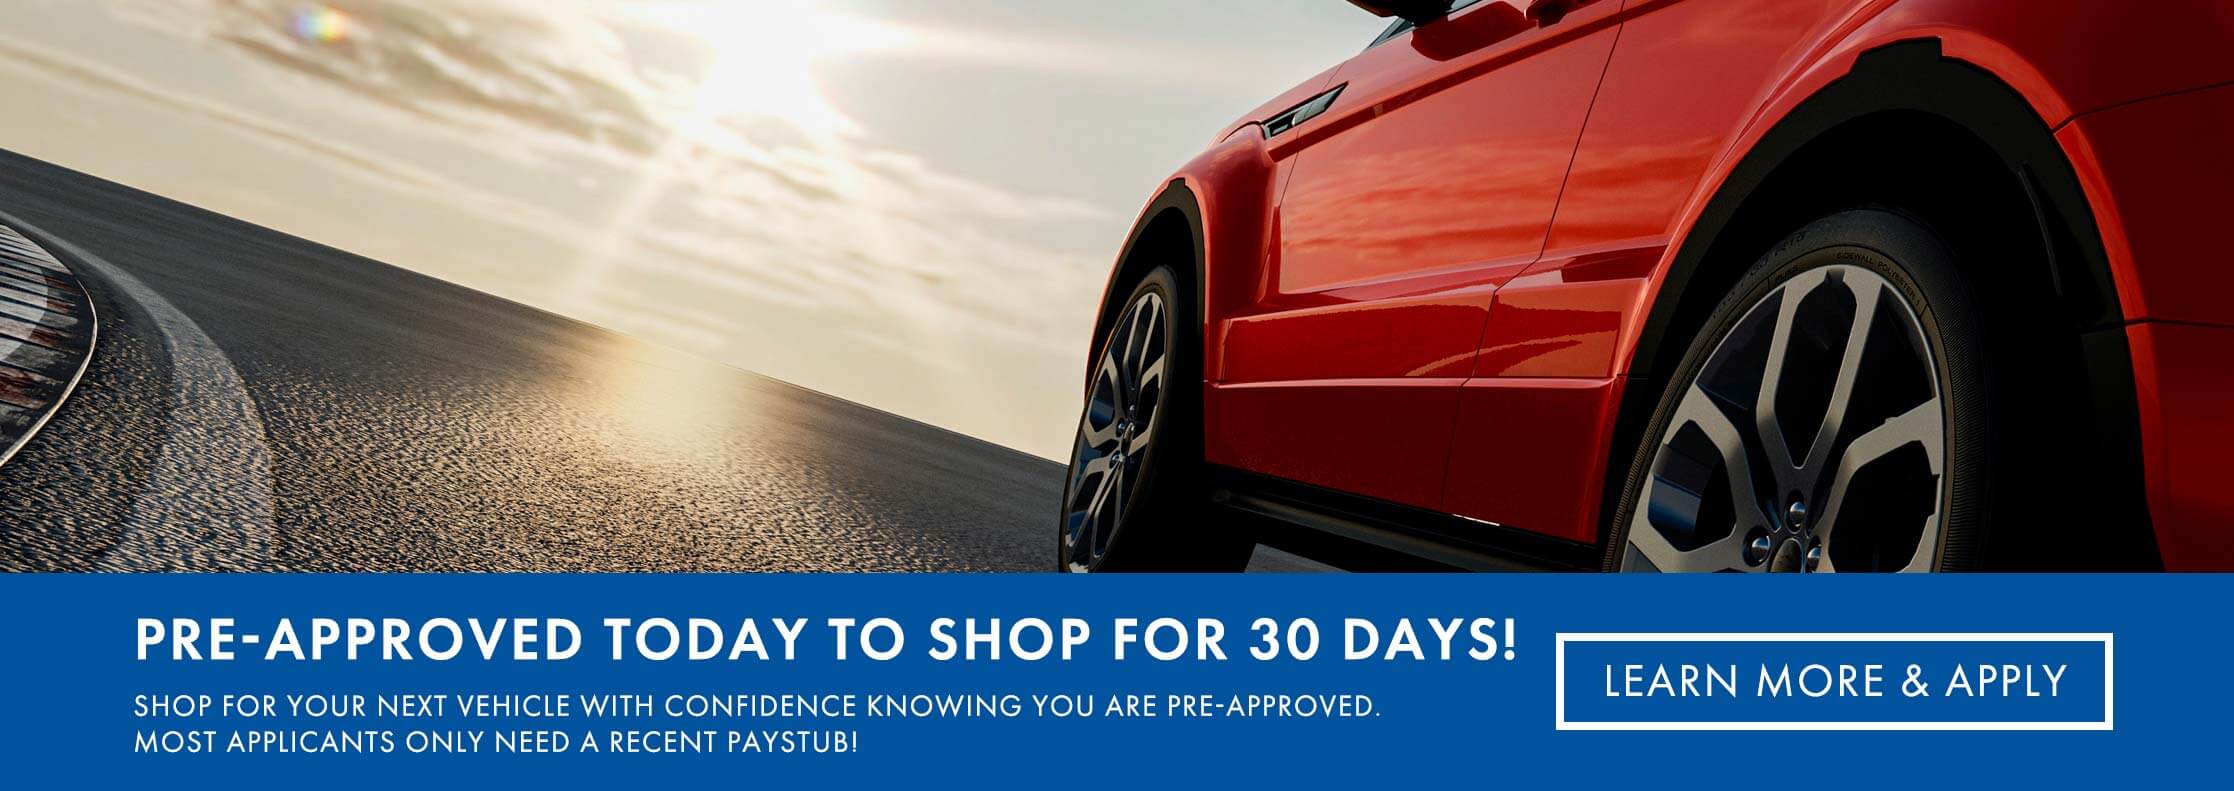 Pre-approved today to shop for 30 days! Shop for your next vehicle with confidence knowing you are pre-approved. Most applicants only need a recent paystub! Learn more and apply.